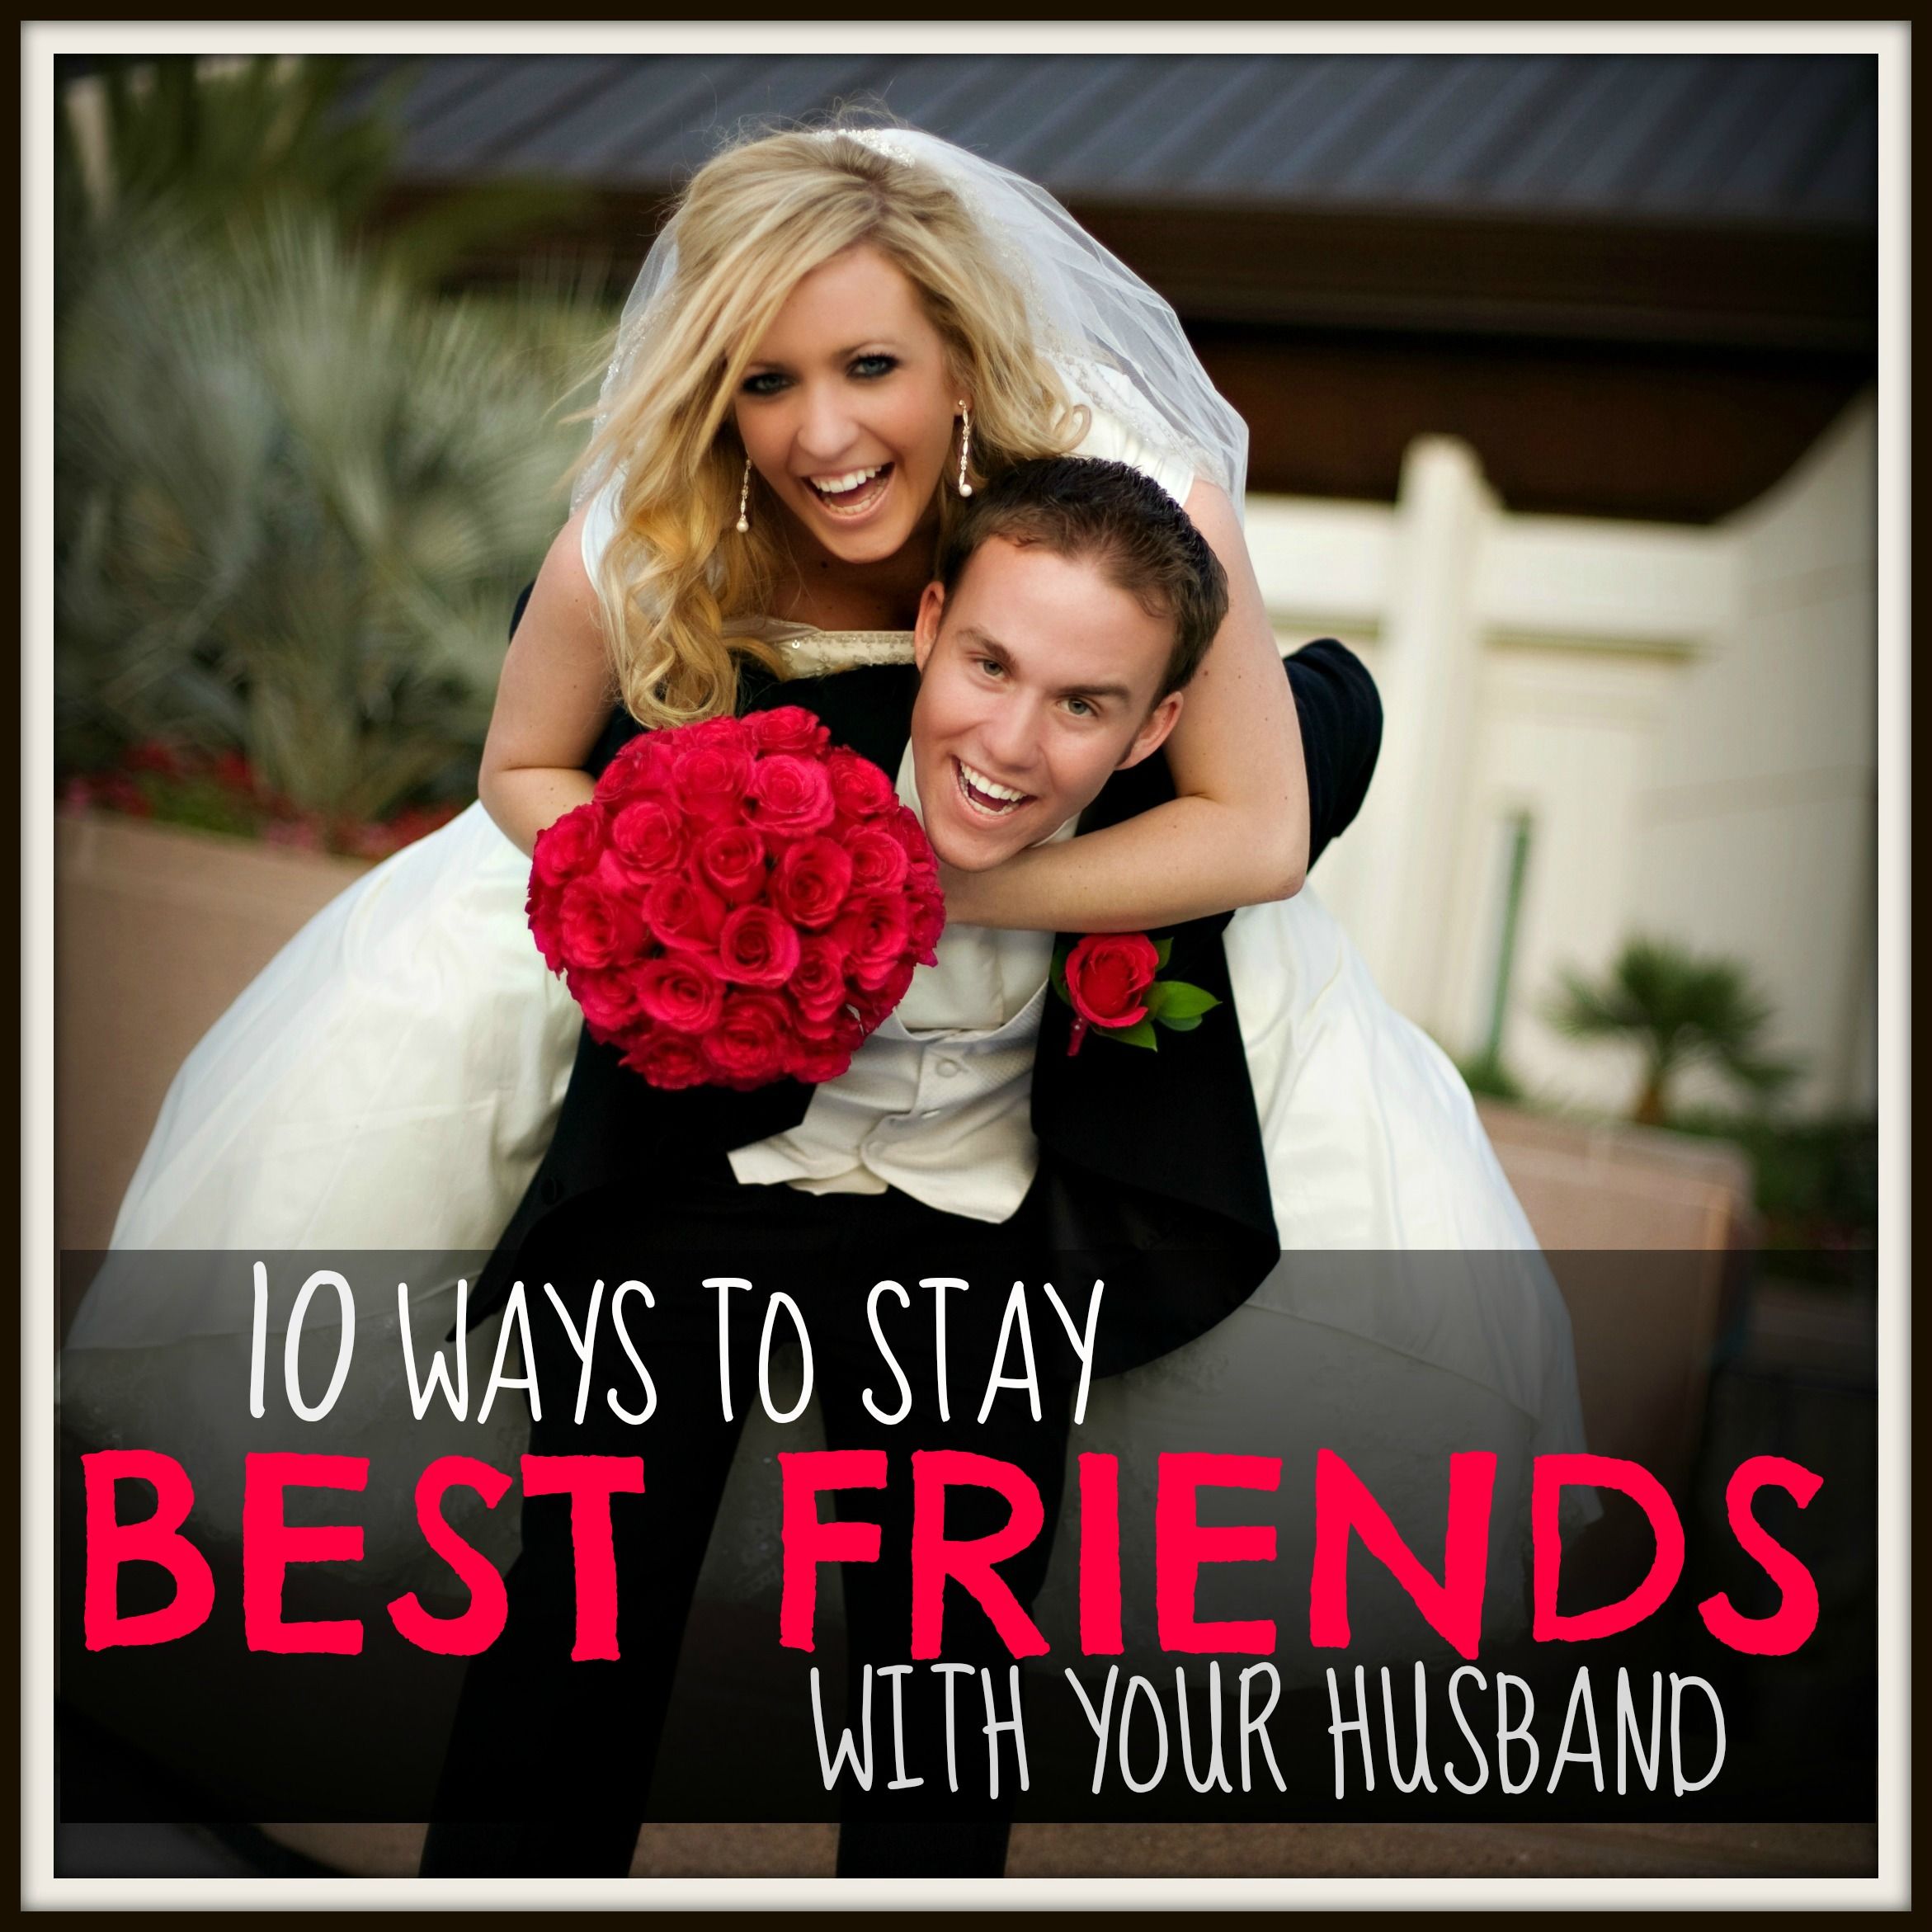 10 Ways to STAY BEST FRIENDS FOREVER with your HUSBAND | Today's the Best Day